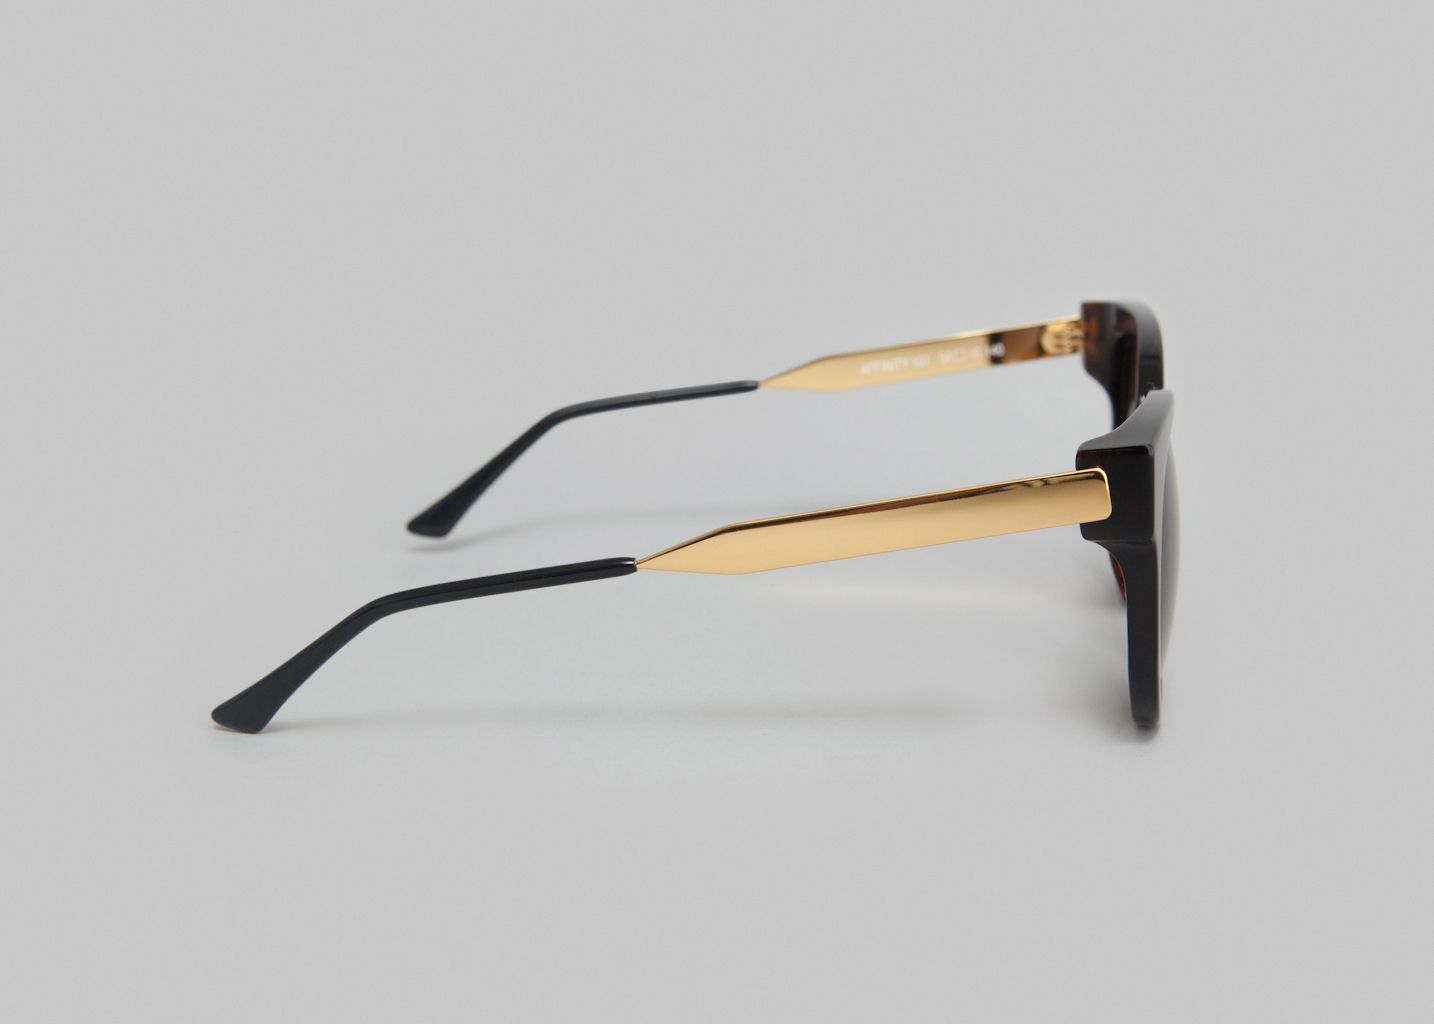 Snobby Suglasses - Thierry Lasry